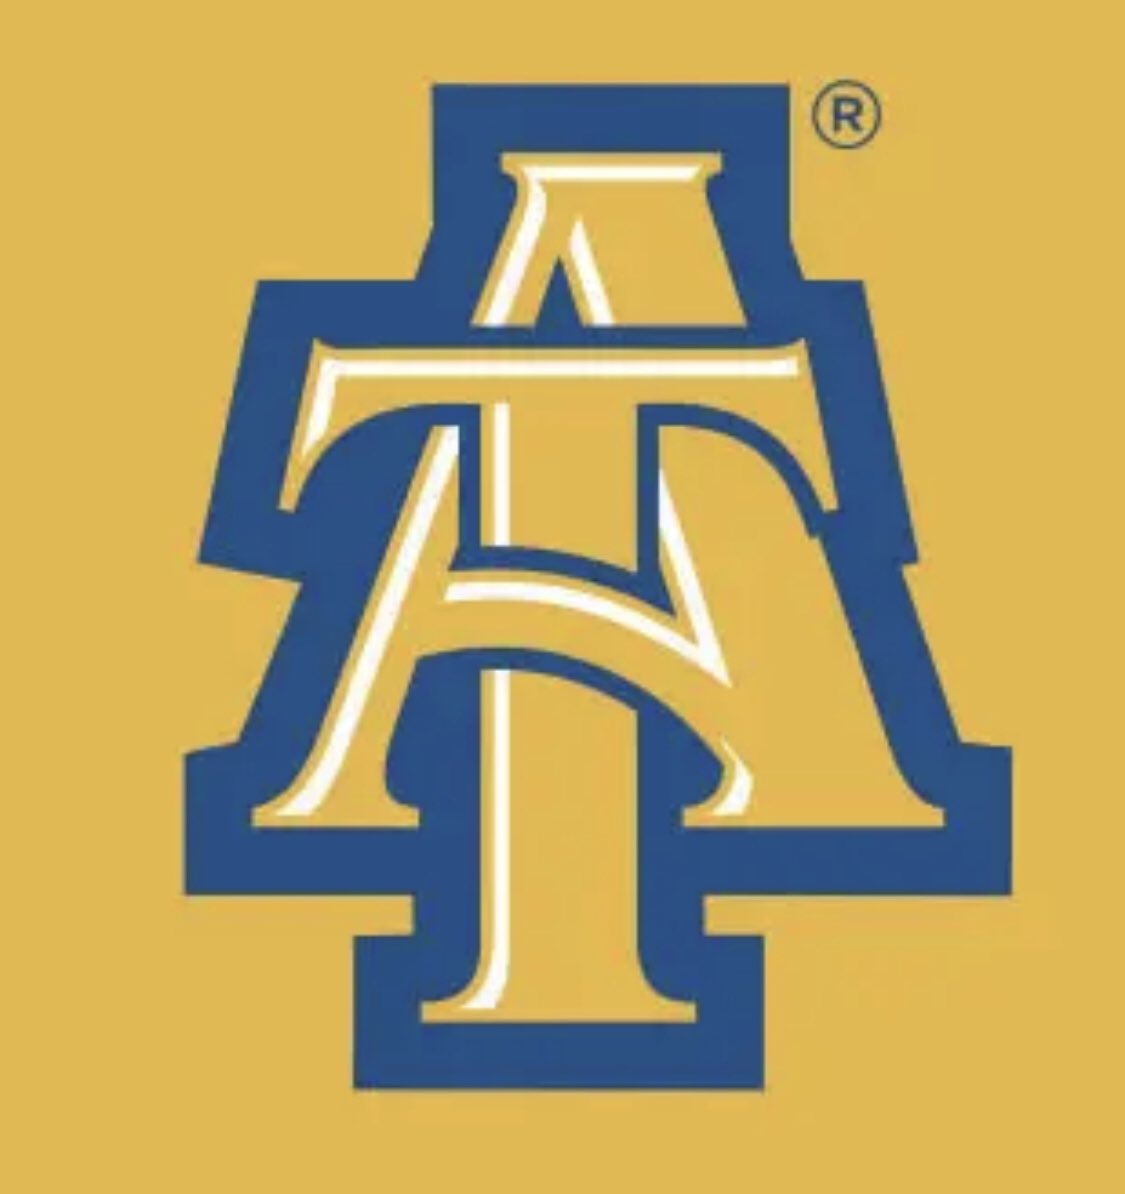 AGTG !! After a great camp today I am blessed to receive my first division 1 offer from @NCATFootball @Coach_Mattes @ClaytonCometsFB @MrLockDown_ @JibrilleFewell @CarolinaXposure @ScottChadwick1